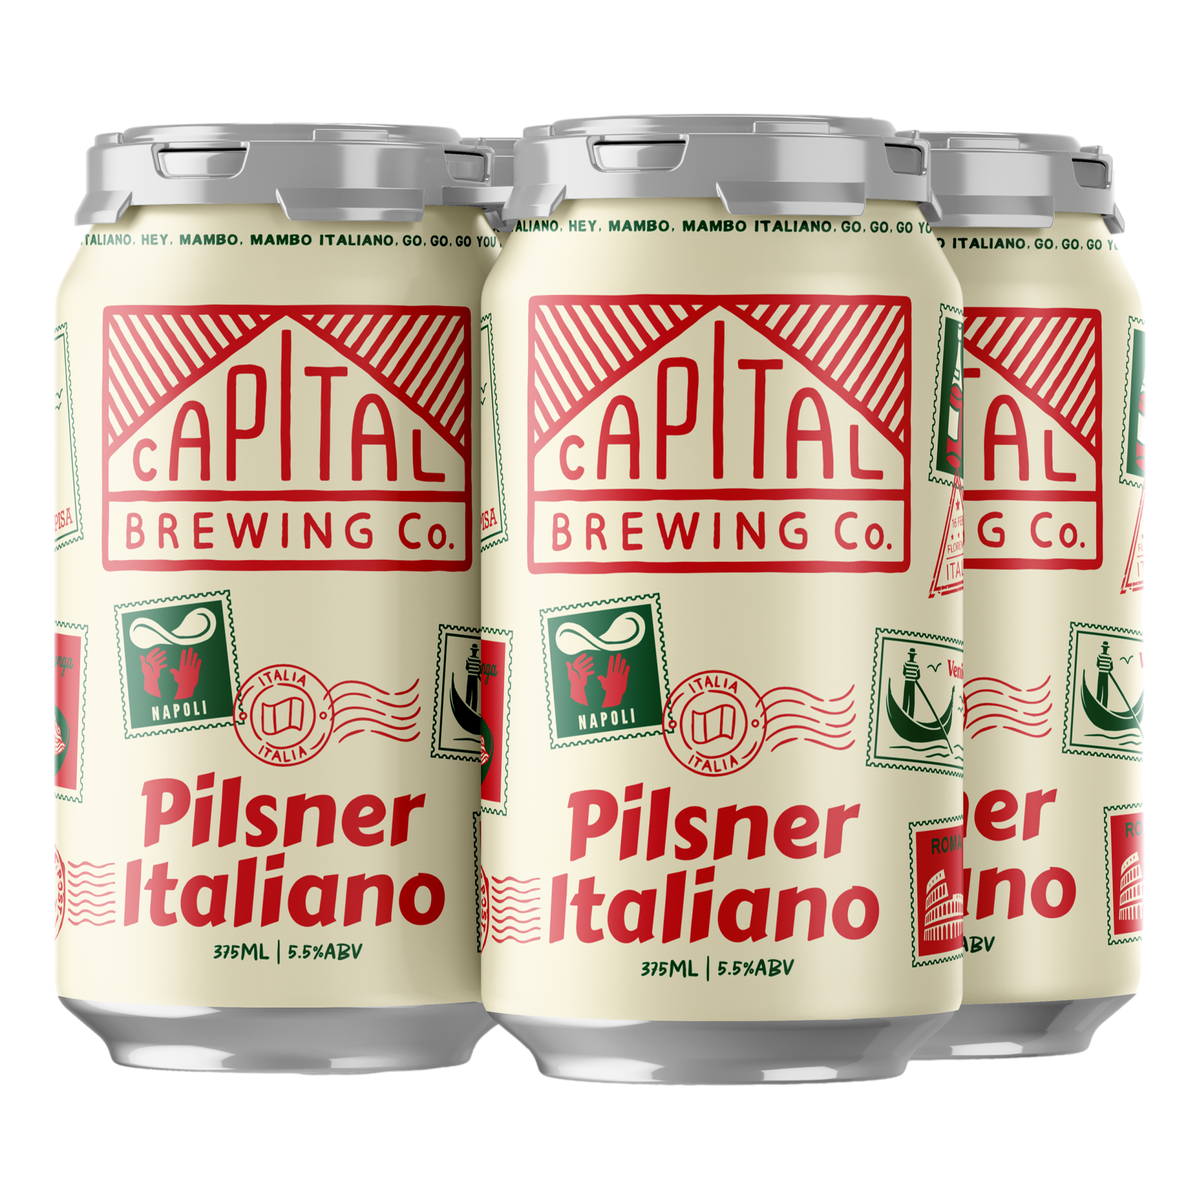 Capital Brewing Co. Pilsner Italiano 375ml Can 4 Pack